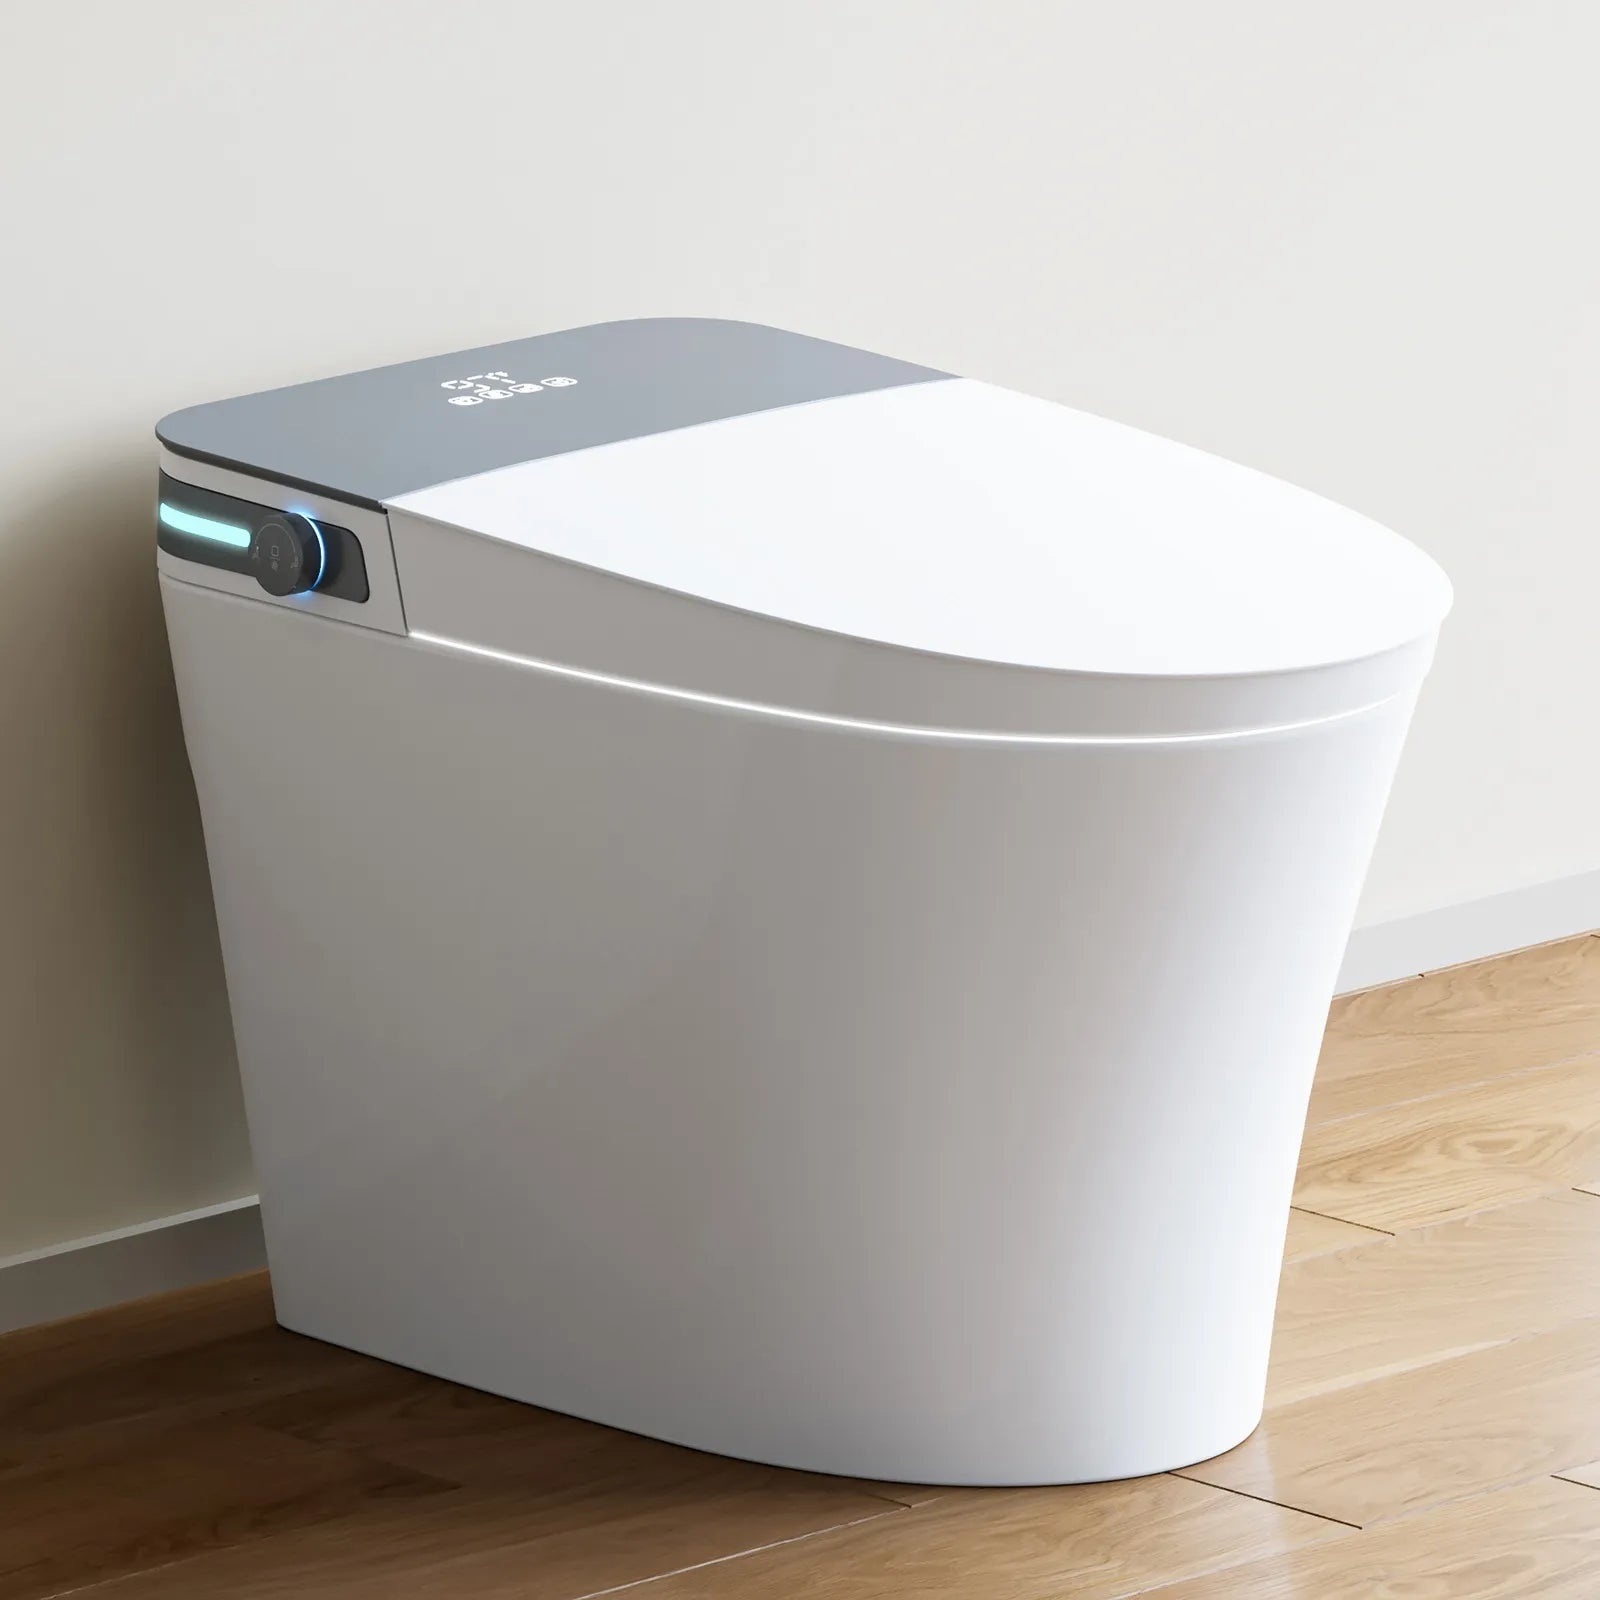 HOROW Smart Toilet with Bidet Seat for 10 Inch Rough In Model T37